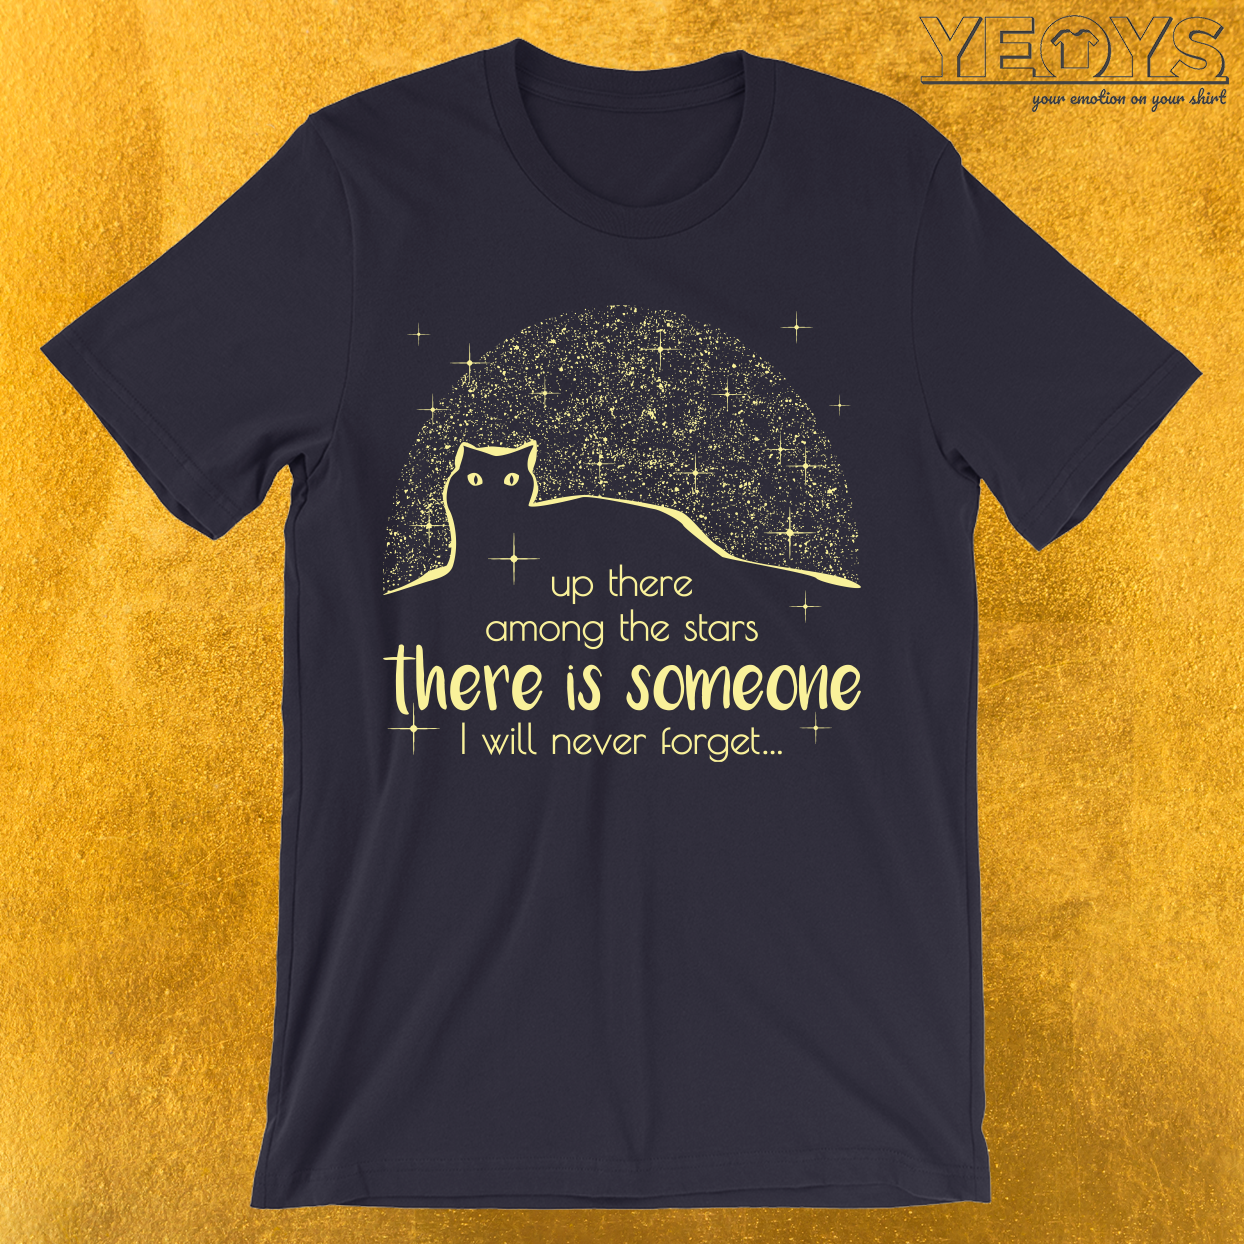 My Cat Up There Among The Stars T-Shirt